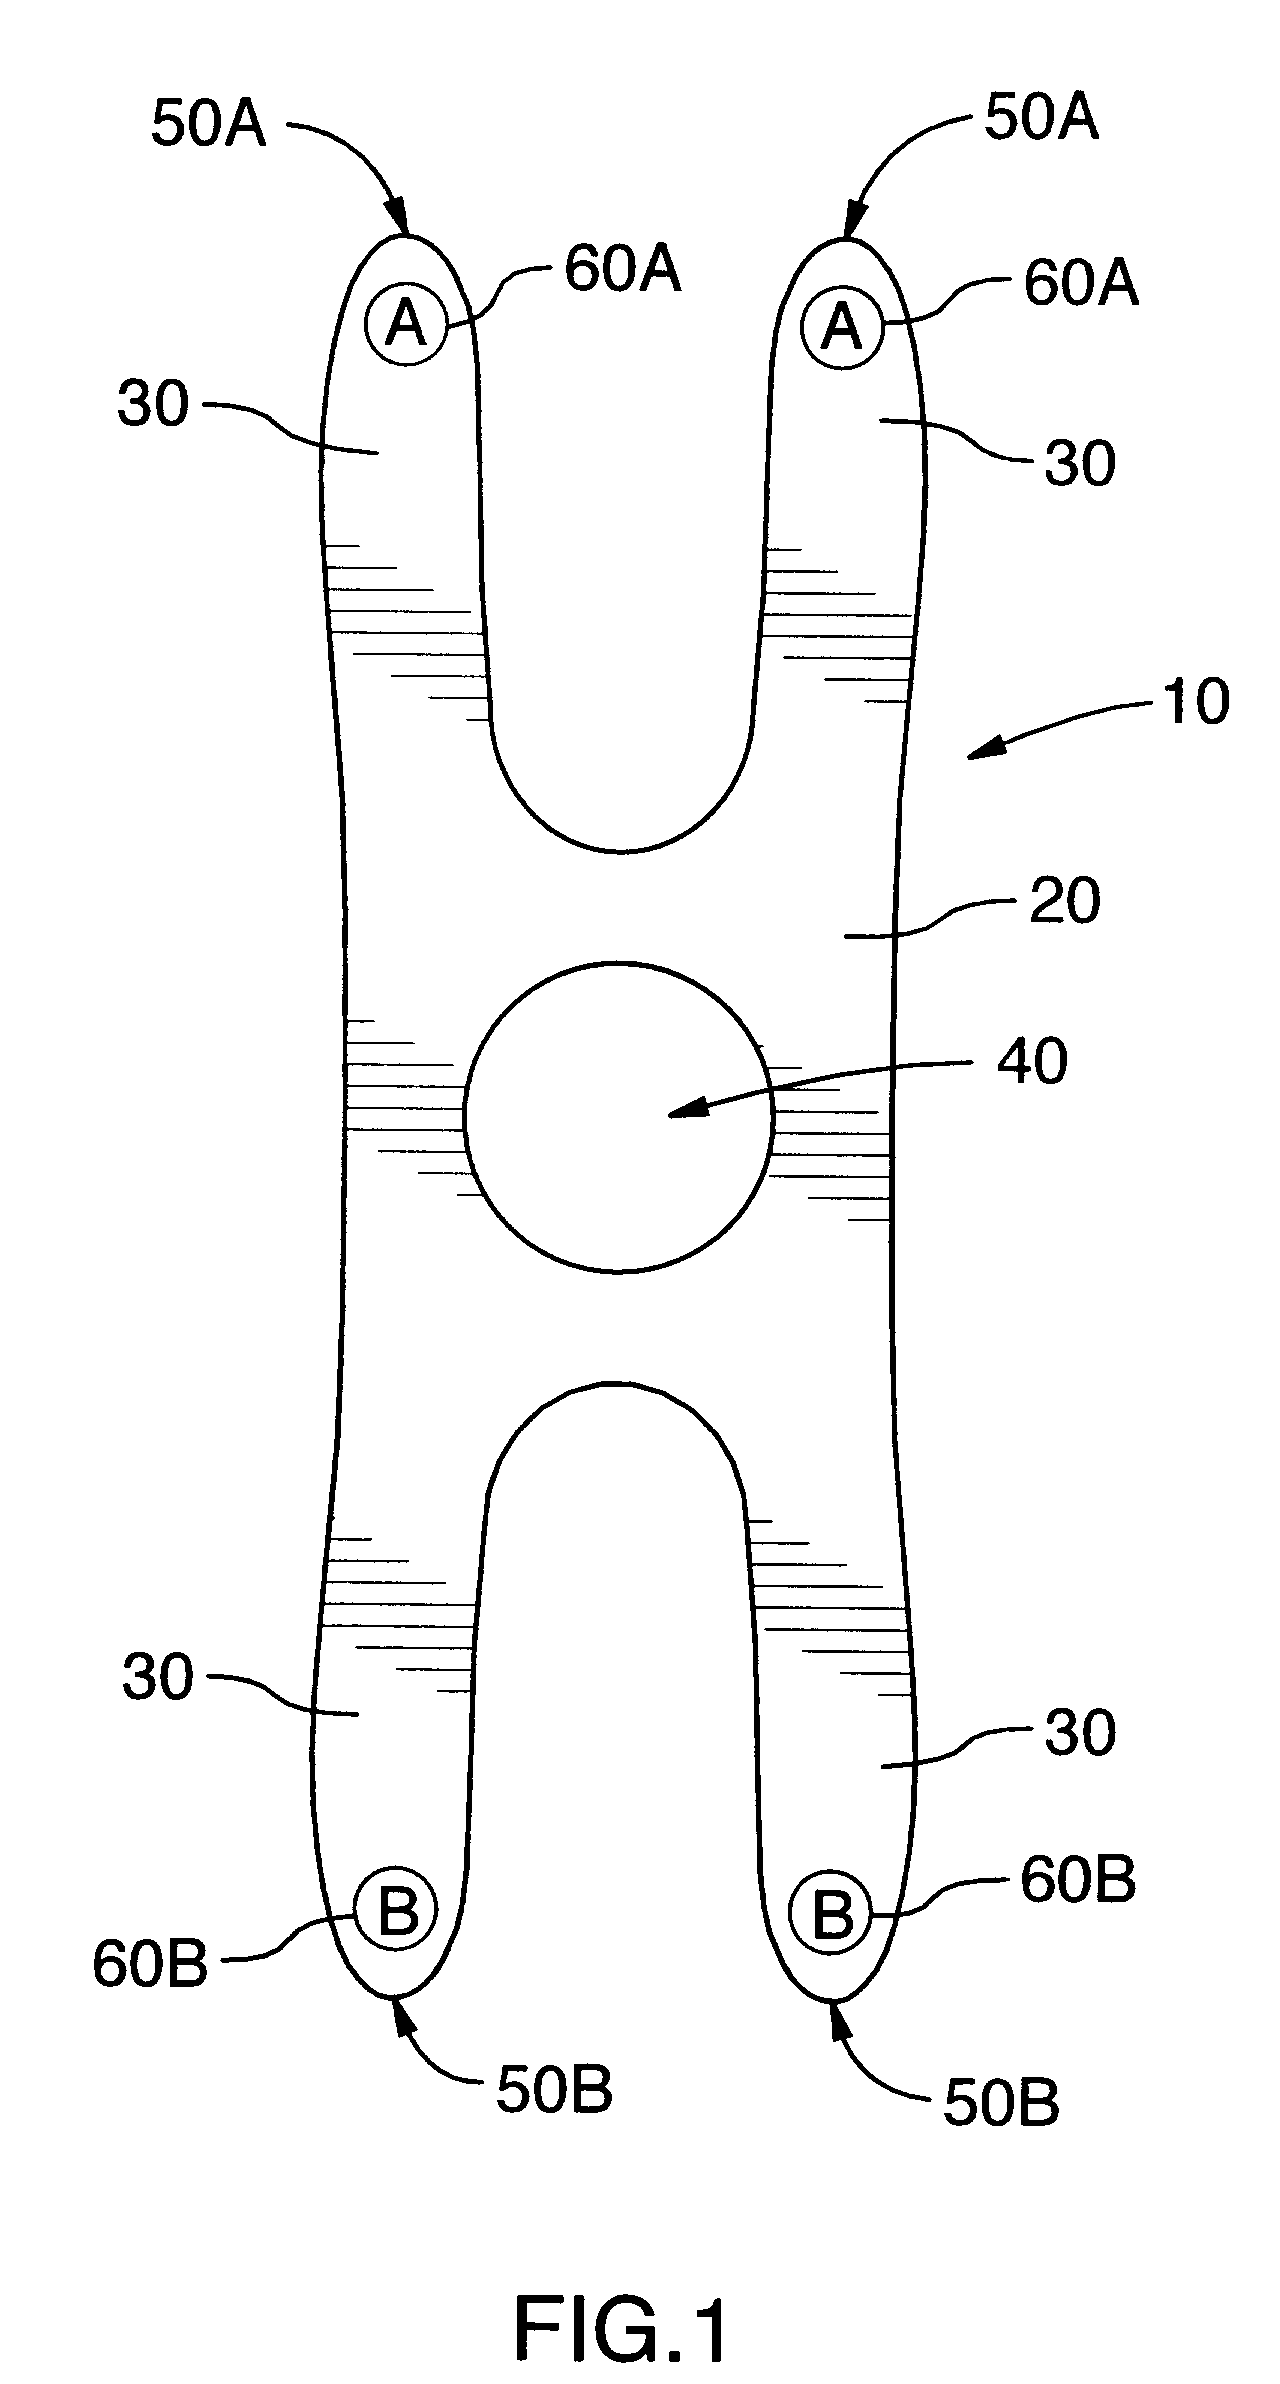 Precut adhesive body support articles and support system